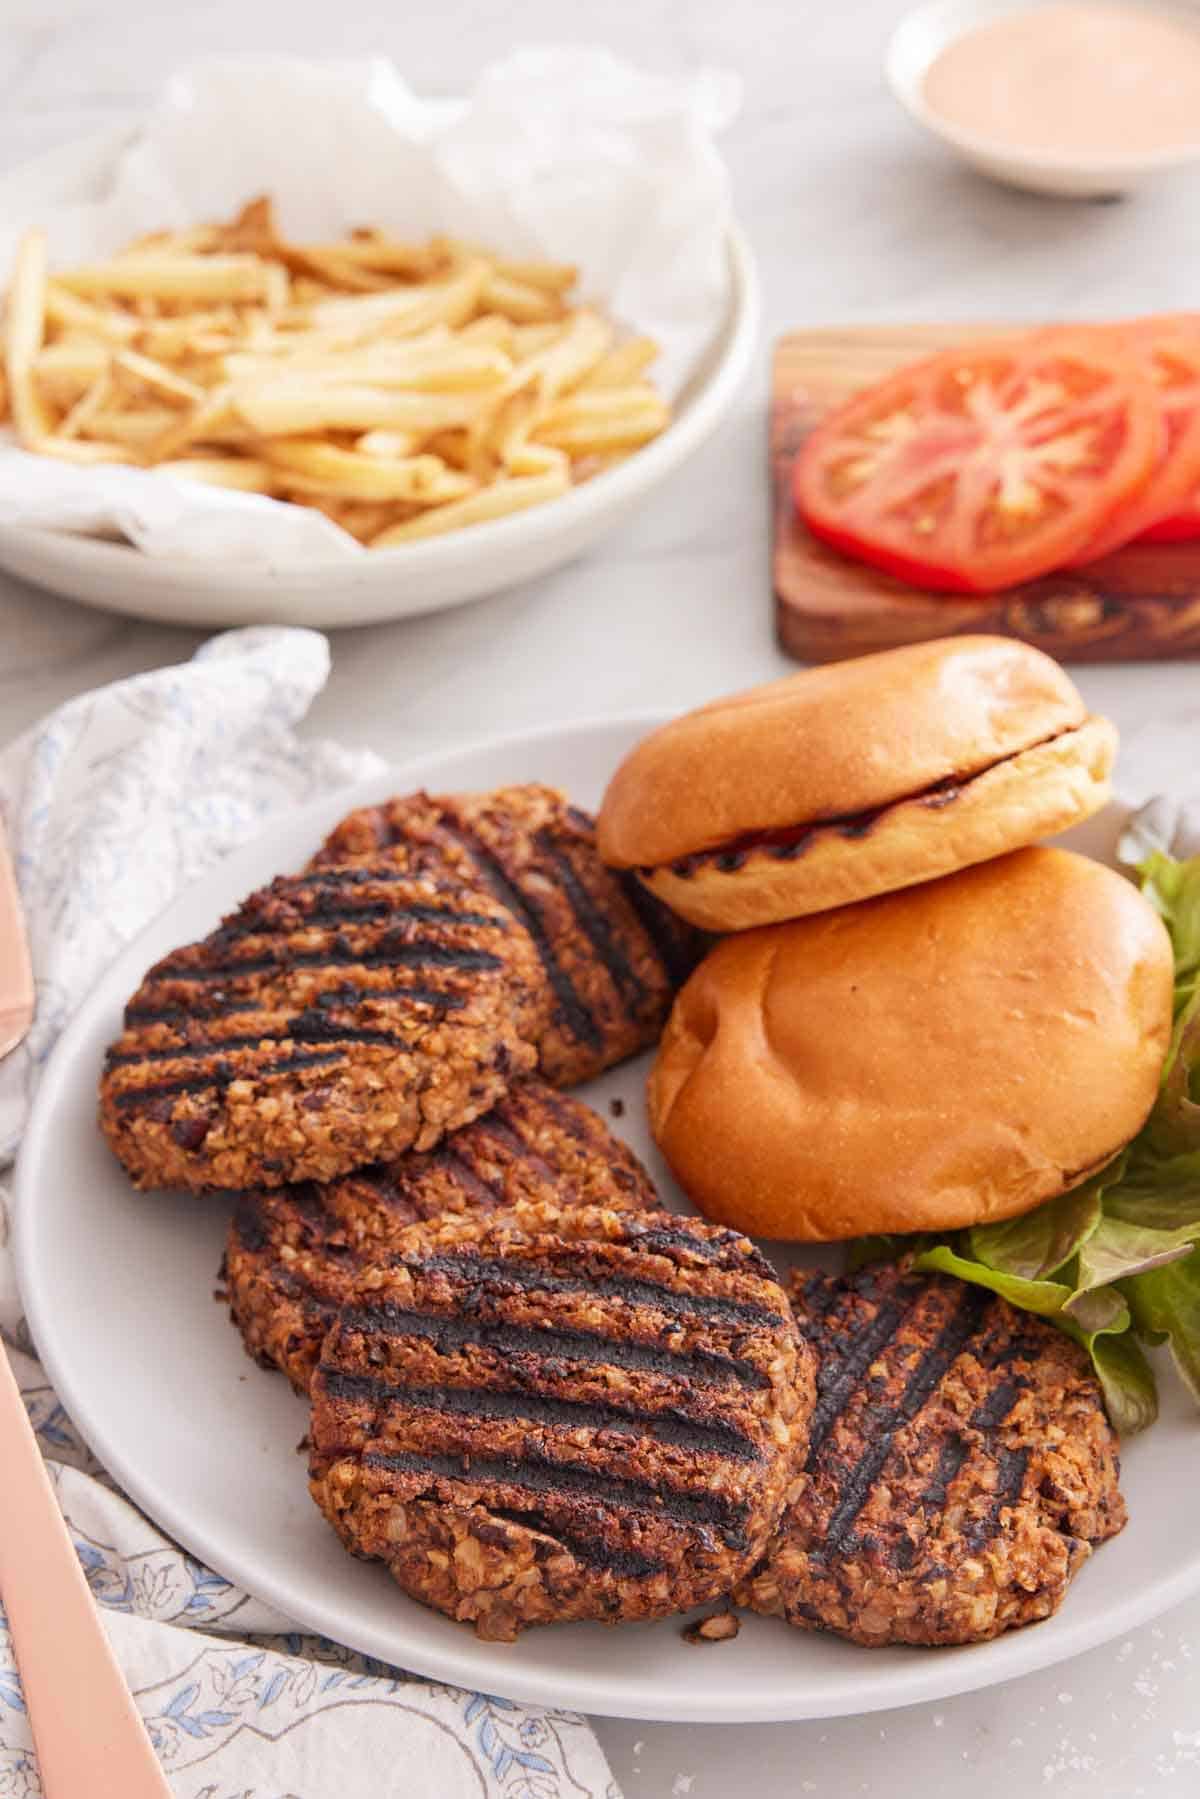 A plate with multiple veggie burger patties with two buns. Sliced tomatoes and fries in the background.